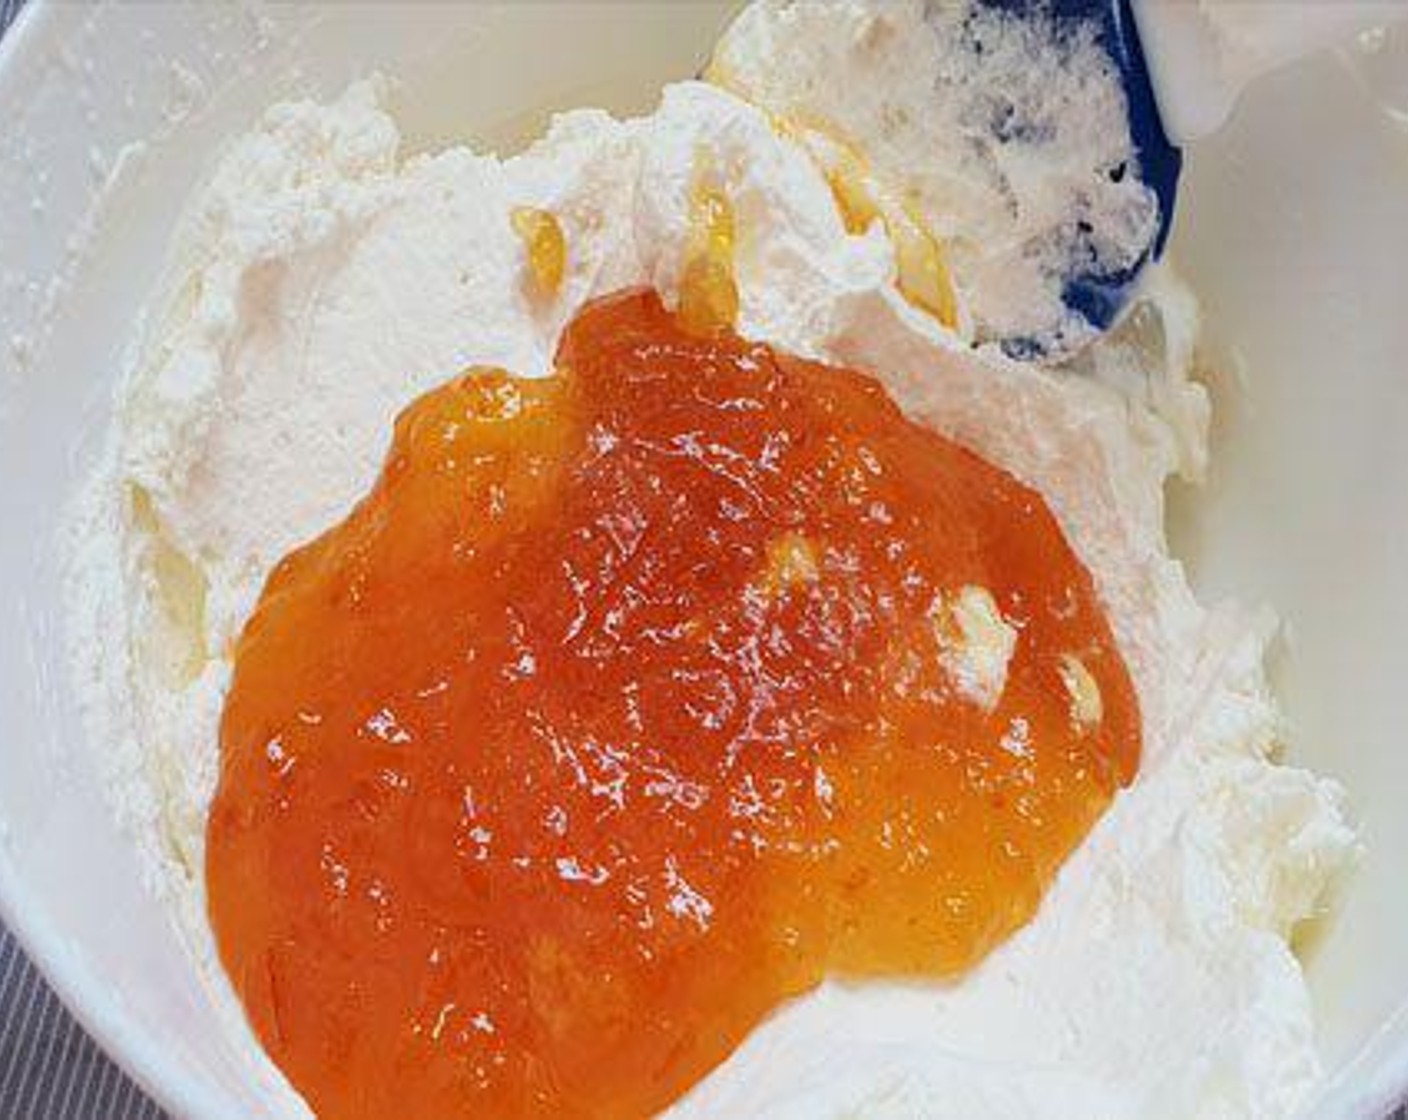 step 5 For filling: Beat the Whipping Cream (1/2 cup) until stiff. Add Orange Marmalade (1/2 cup) and Orange (1/2 tsp) and combine.